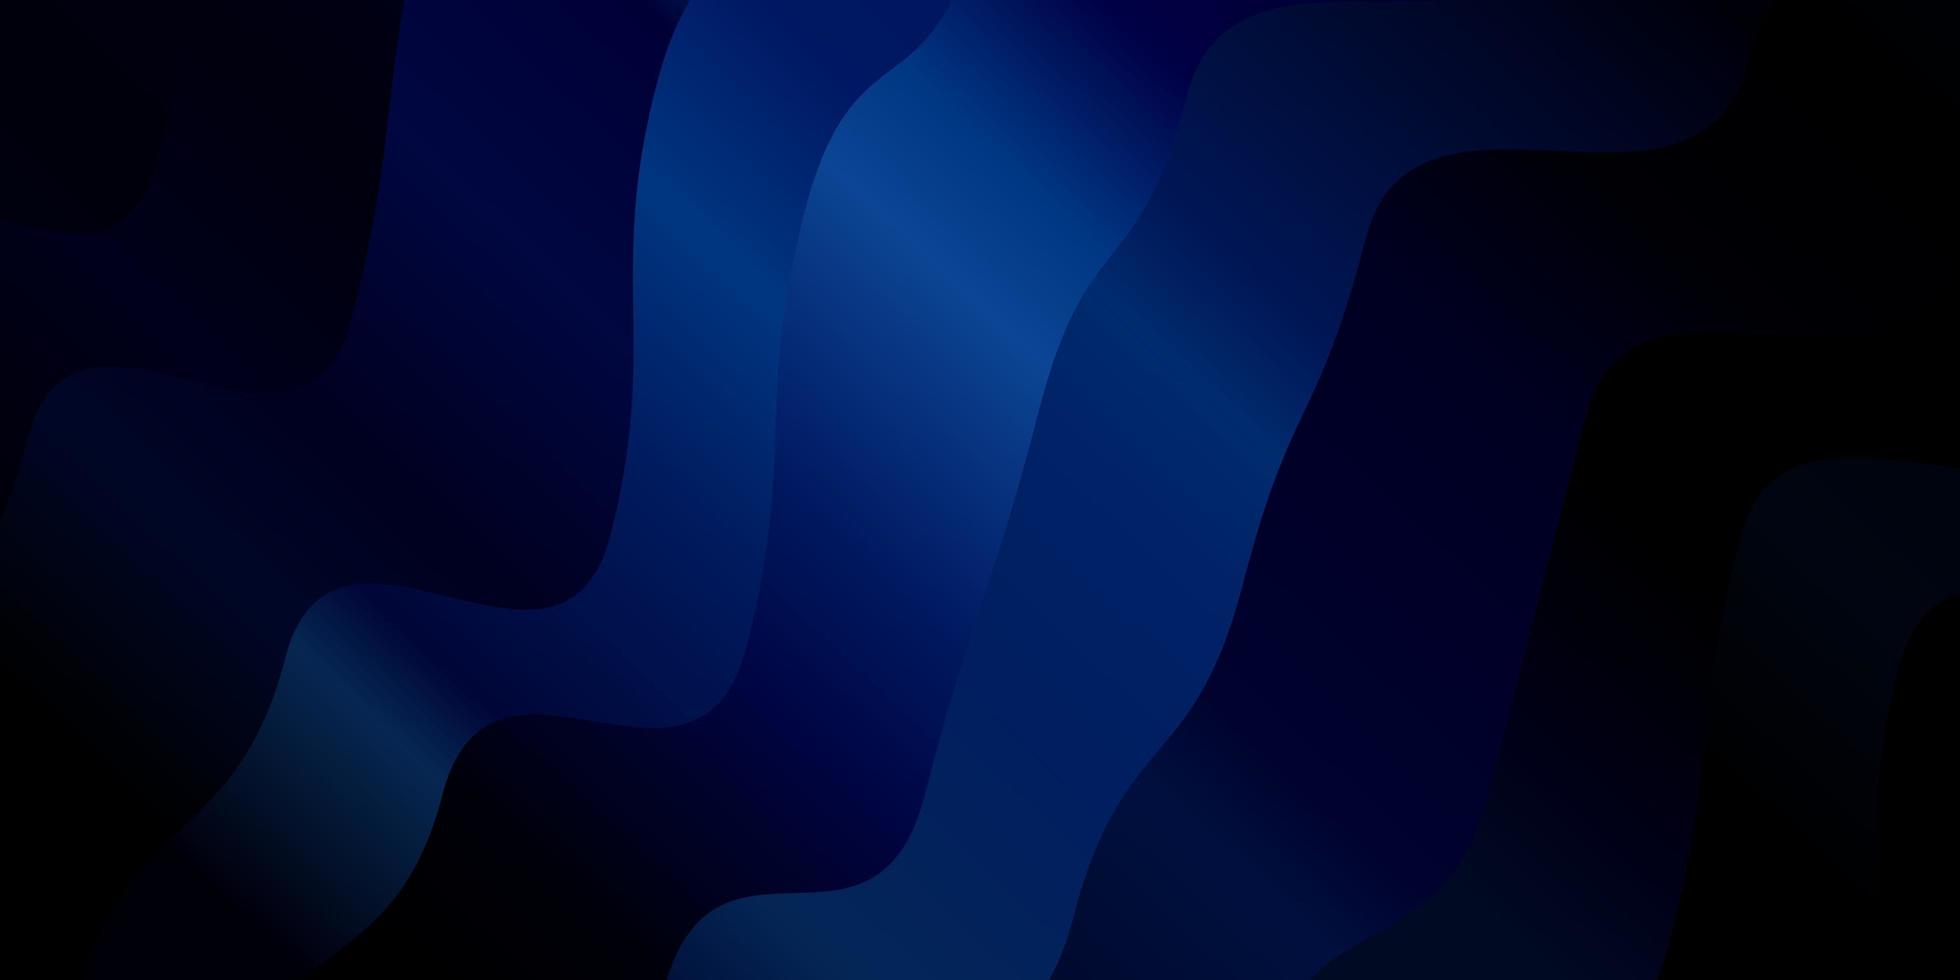 Dark BLUE vector background with bent lines. Illustration in abstract style with gradient curved. Smart design for your promotions.